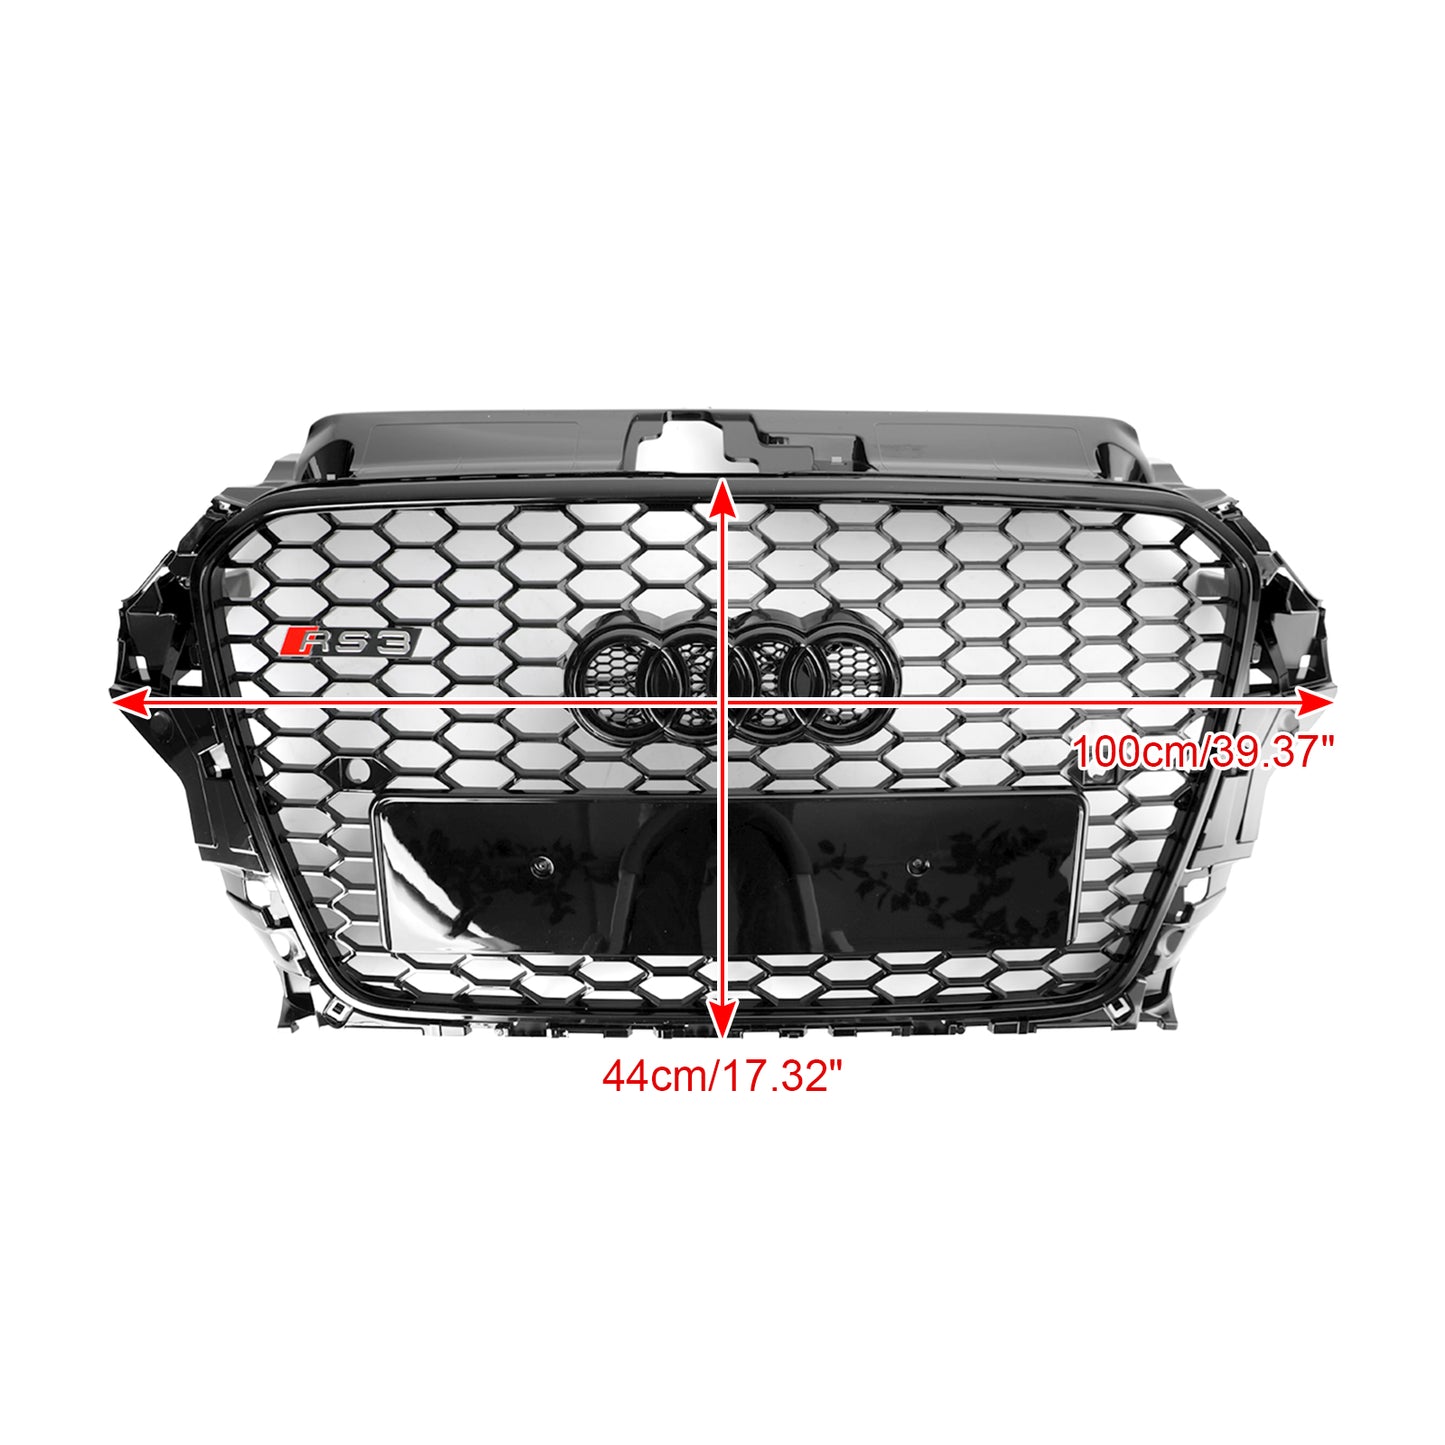 2013-2016 Audi A3 S3 Front Hood Henycomb Bumper Car Grille Grill RS3 Style Black